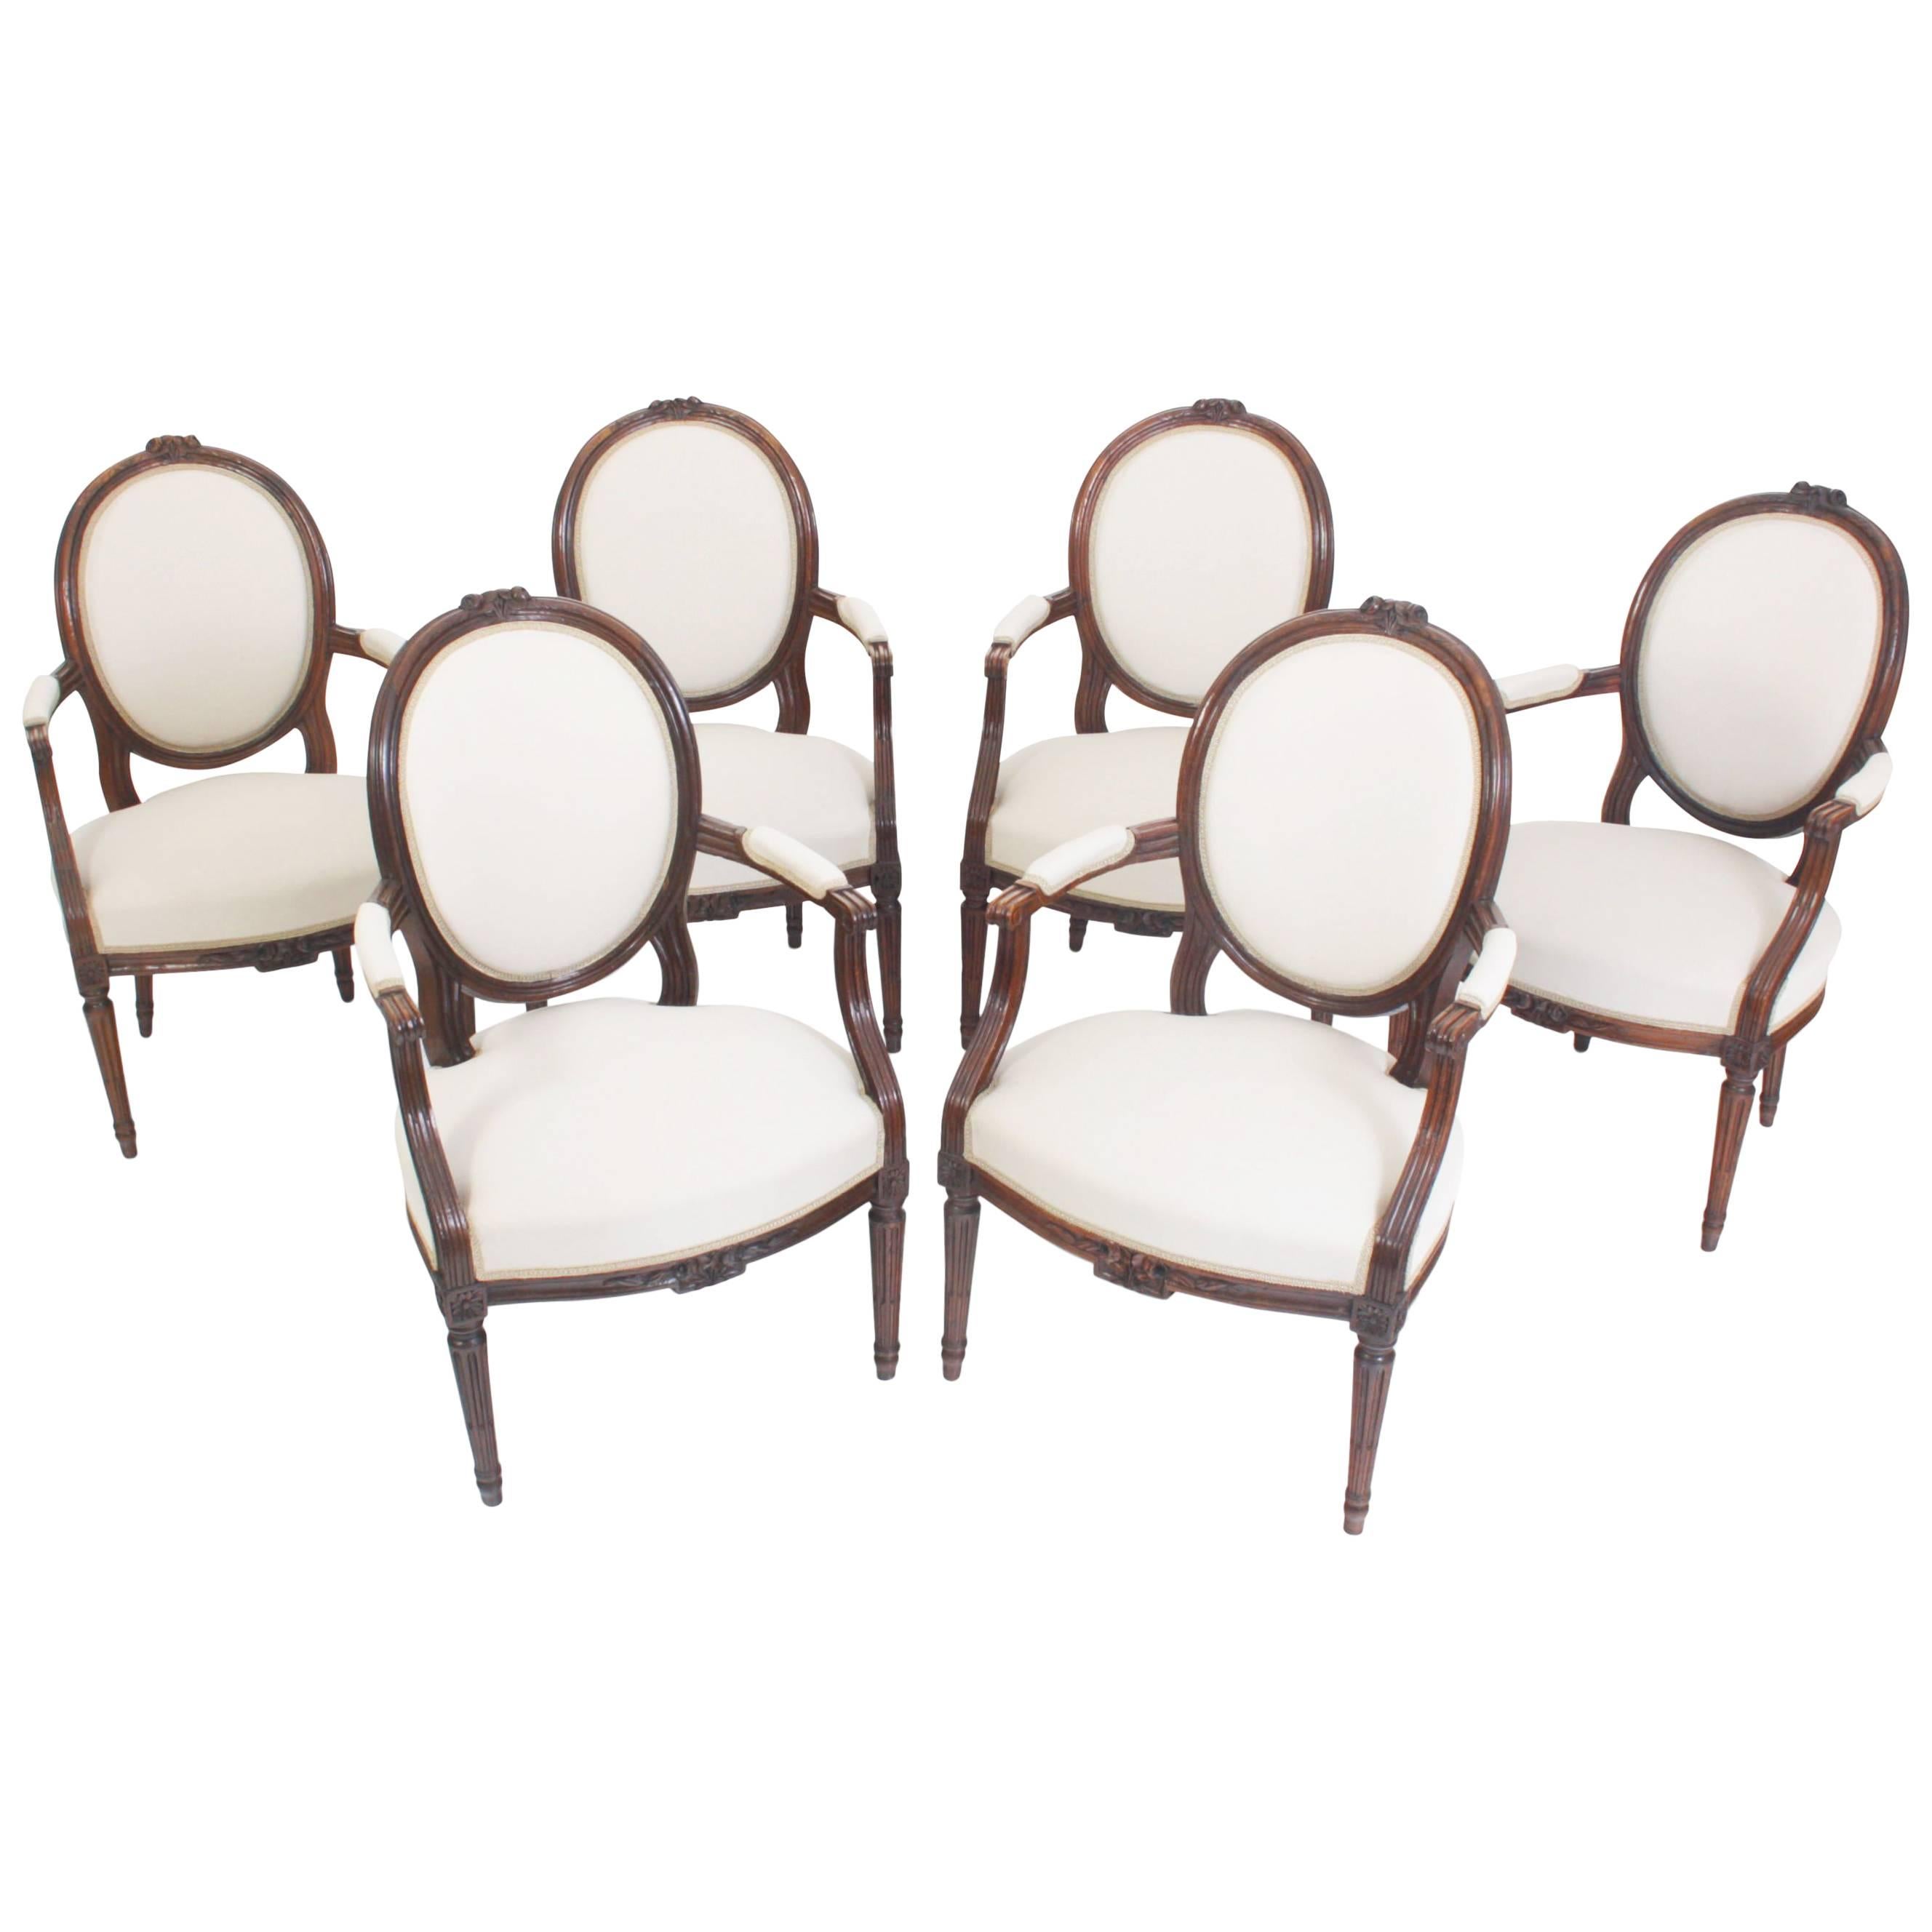 Set of Six Louis Seize-Style Armchairs, France, First Half of the 19th Century